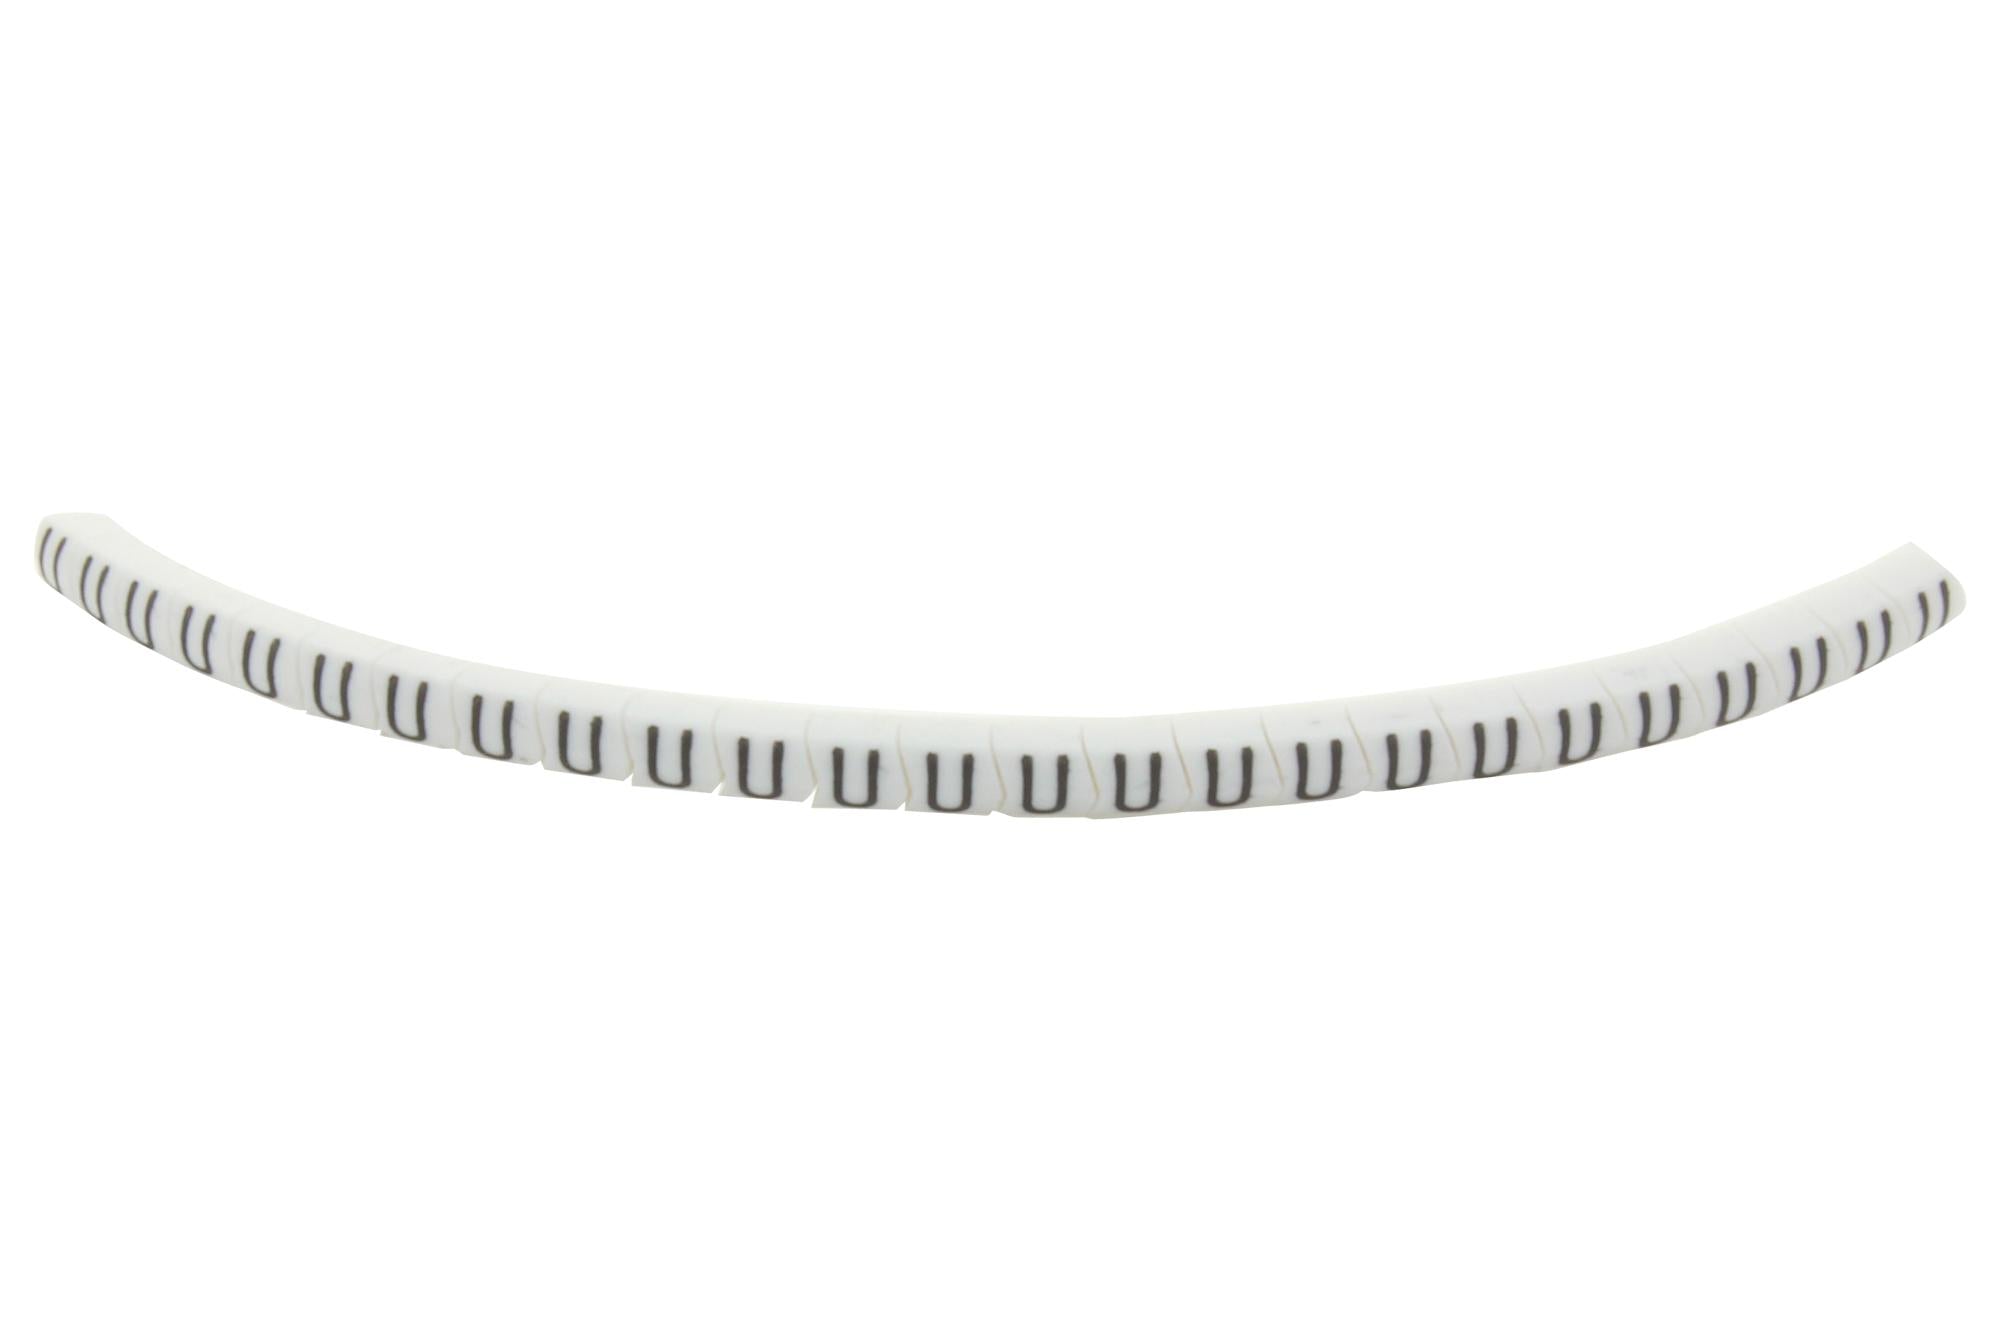 901-11094 CABLE MARKER, PRE PRINTED, PVC, WHITE HELLERMANNTYTON